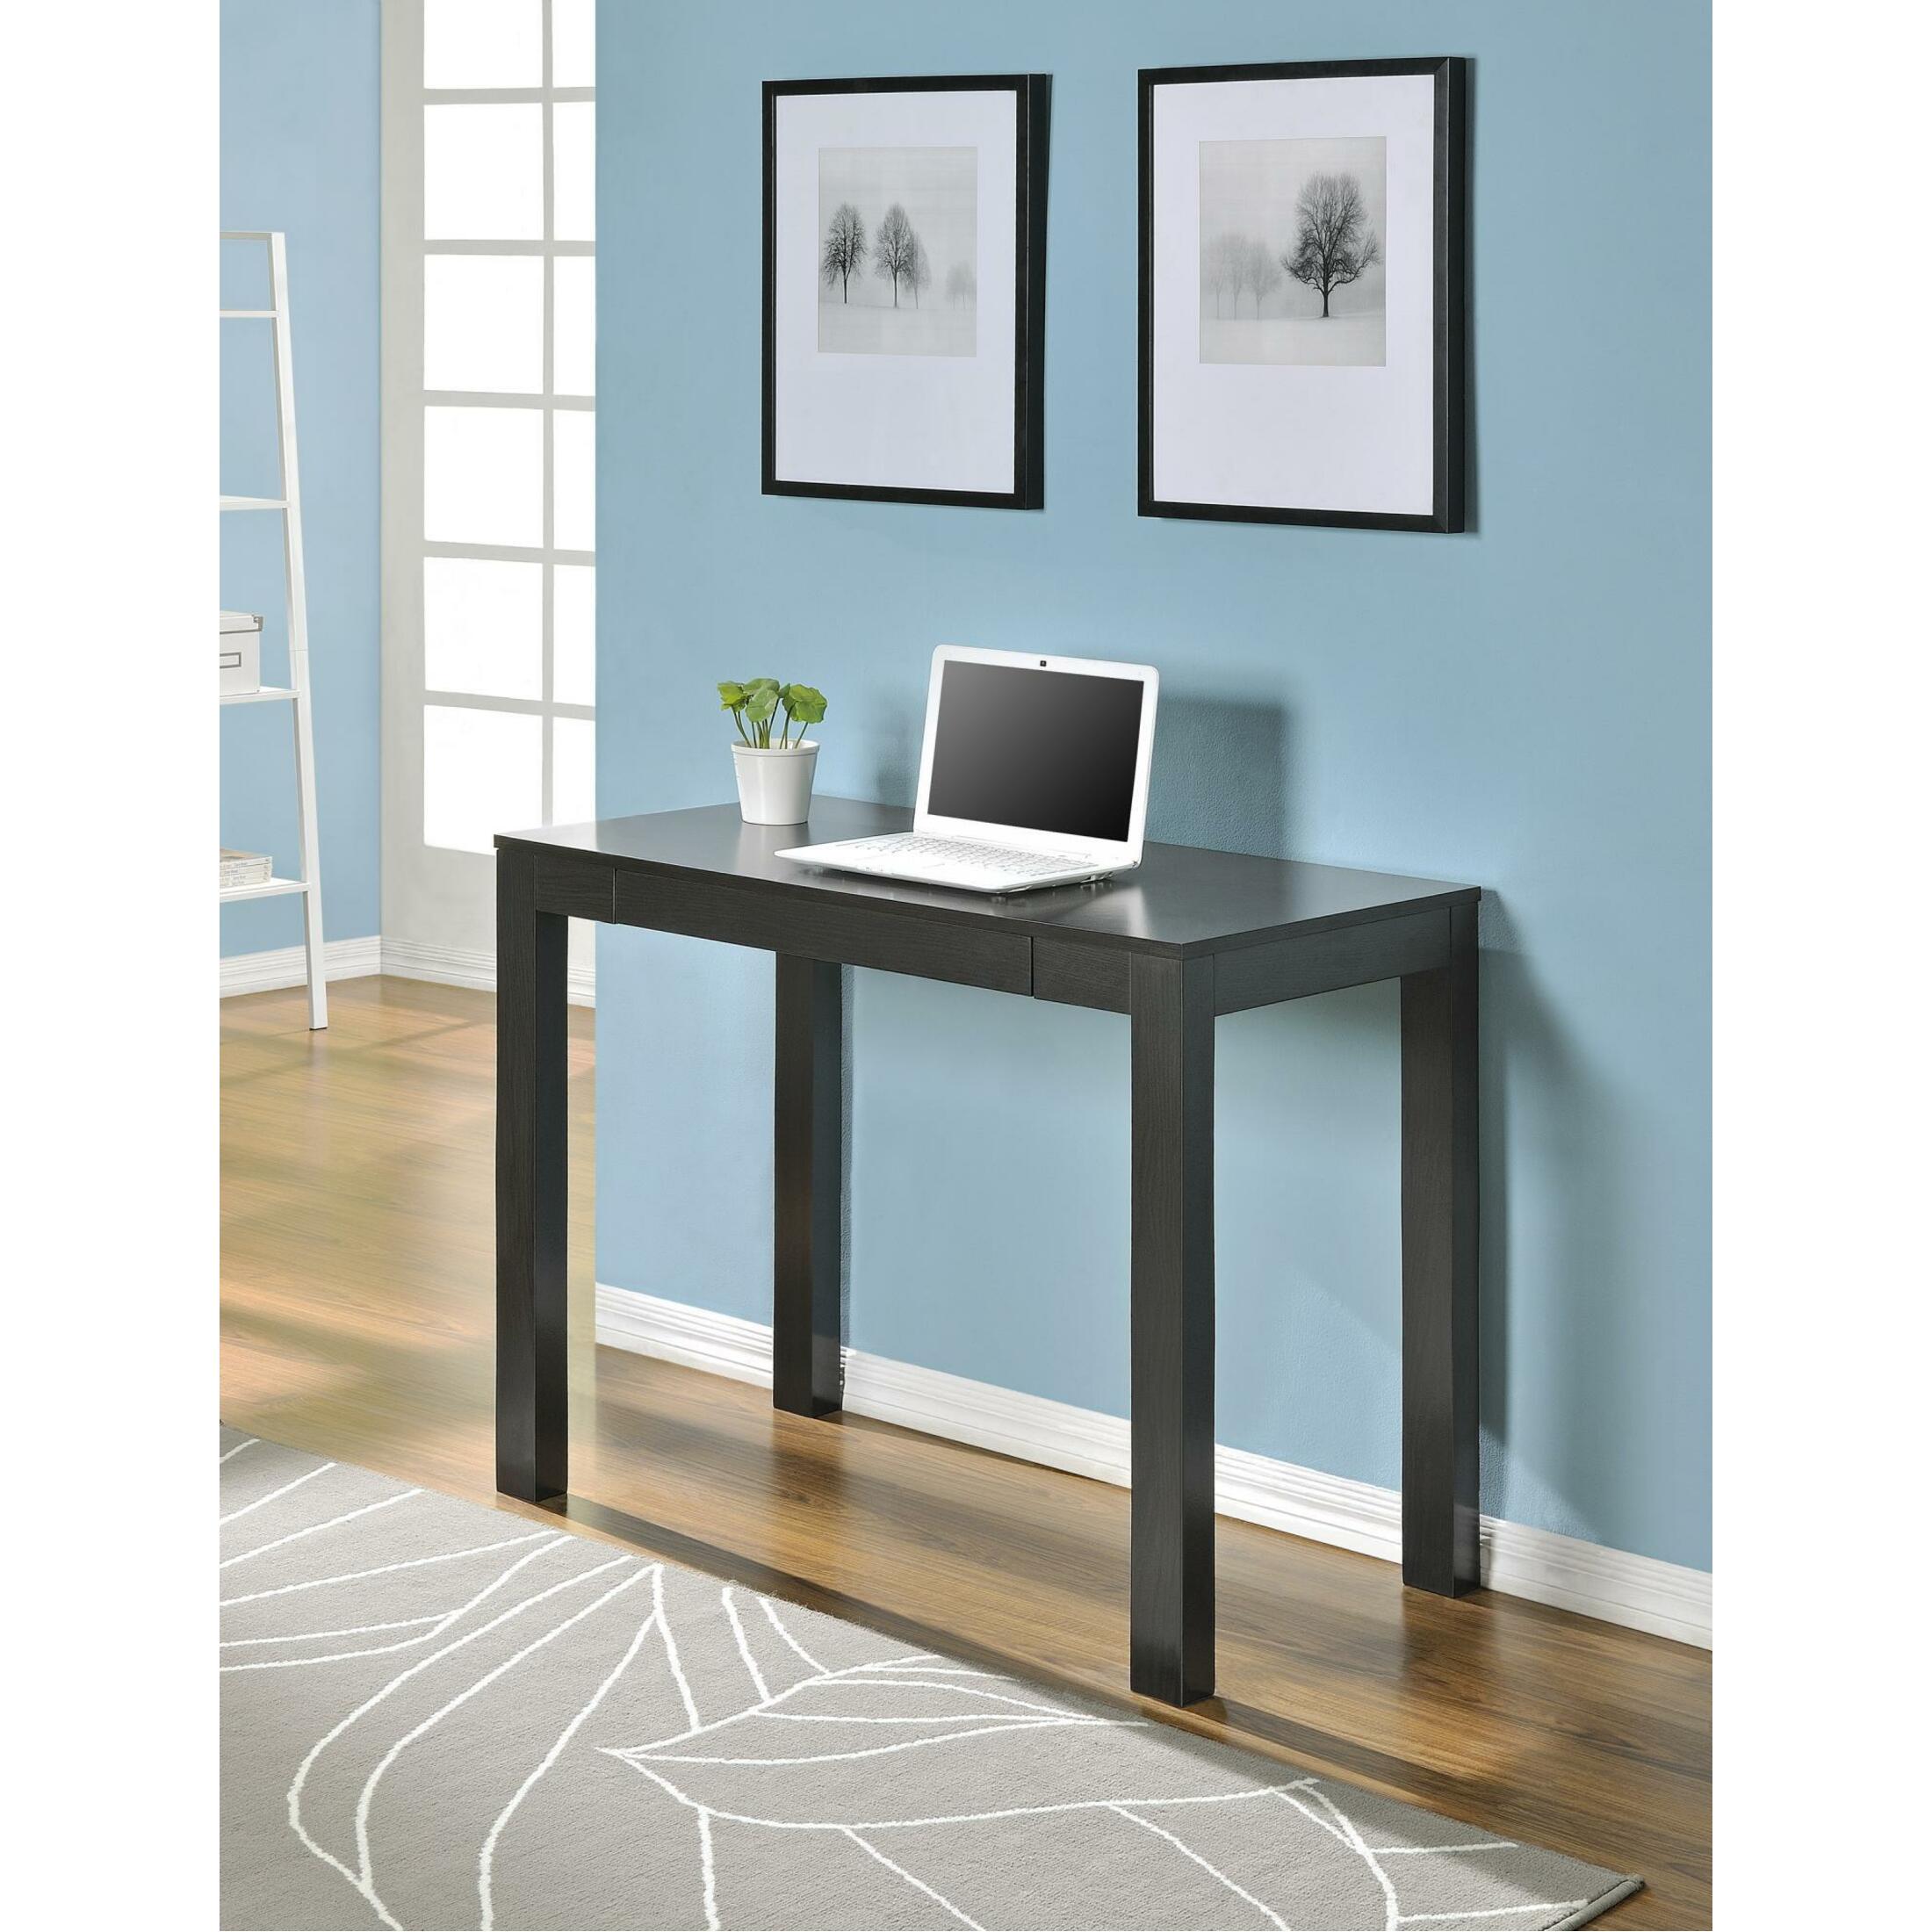 Ameriwood Parsons Desk with Drawer, Espresso Finish - image 2 of 2